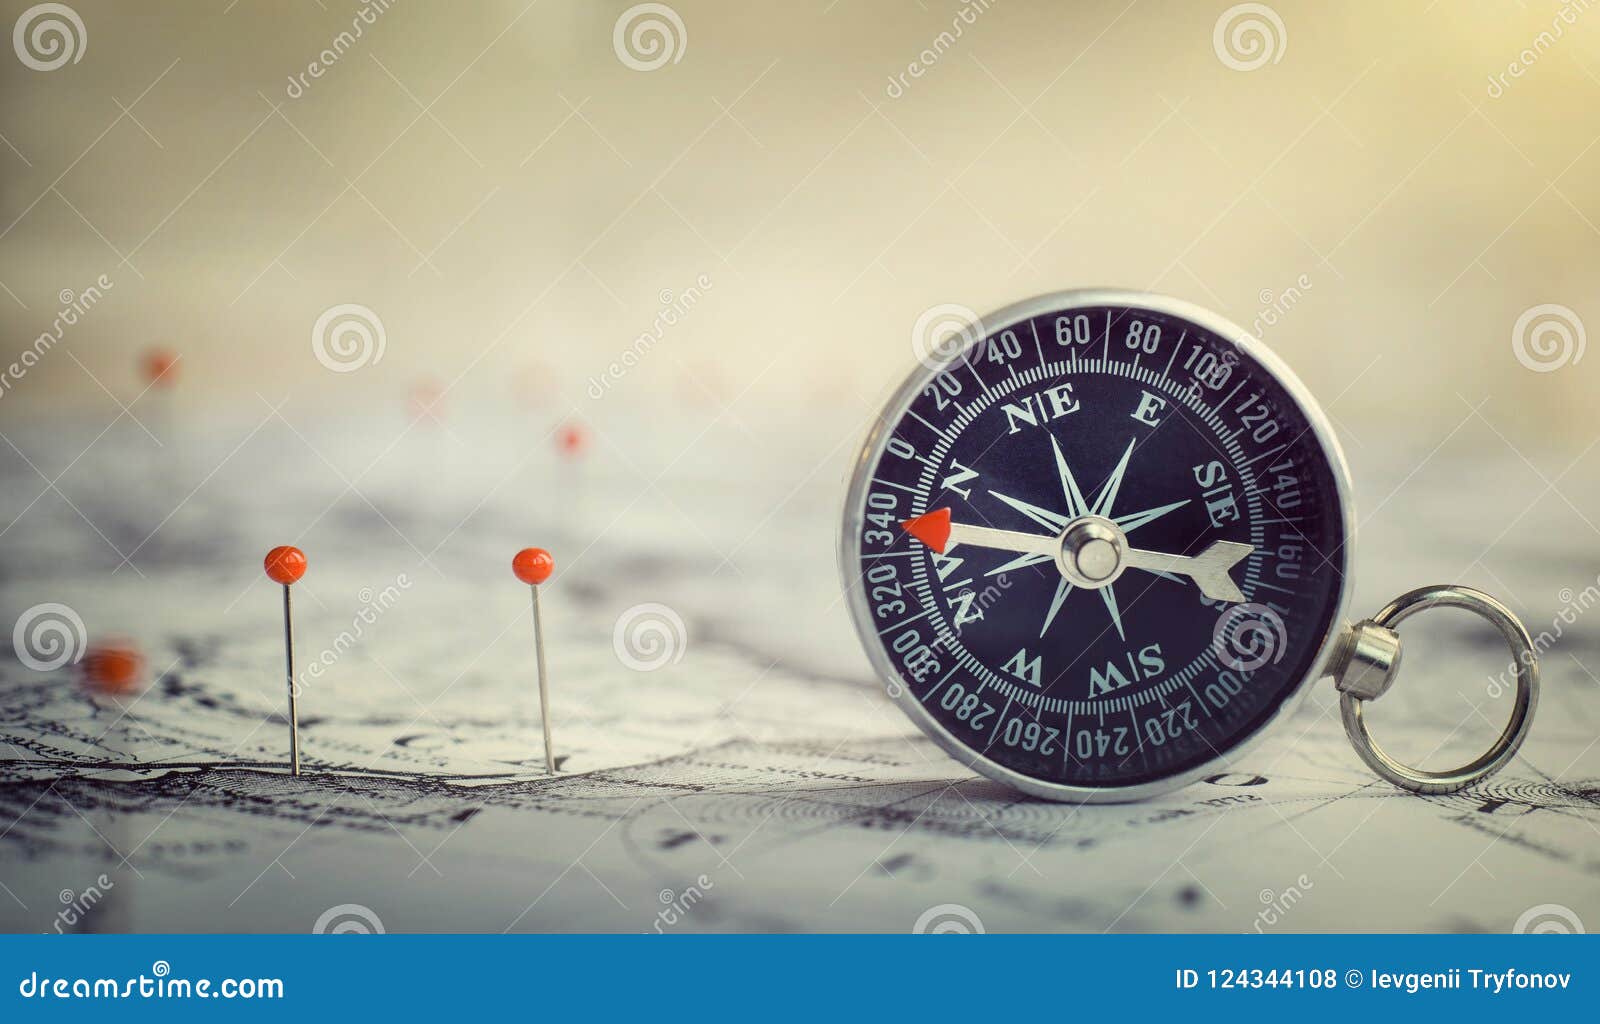 magnetic compass on world map.travel, geography, navigation, tourism and exploration concept background. macro photo. very